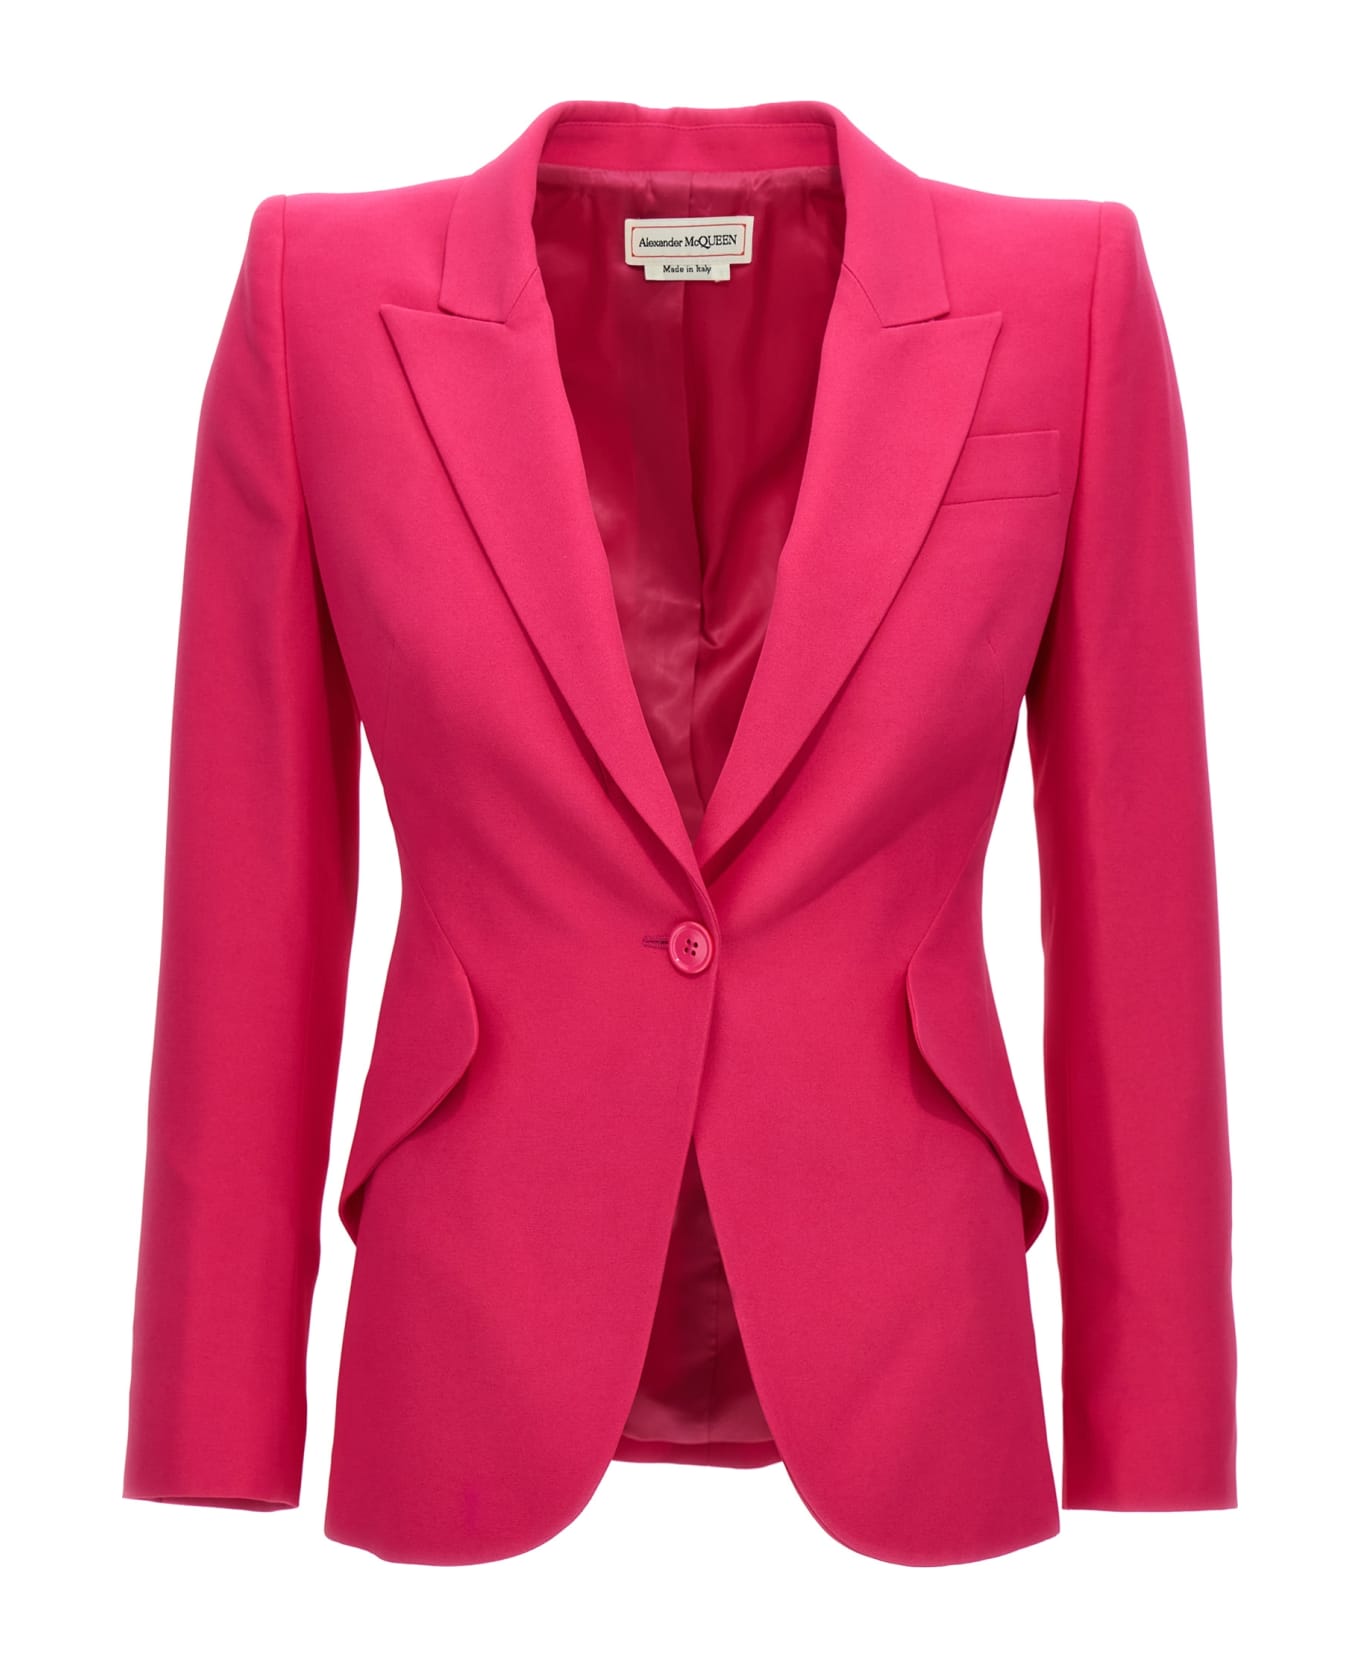 Alexander McQueen Single-breasted Jacket With Peaked Revers - Fuchsia ブレザー